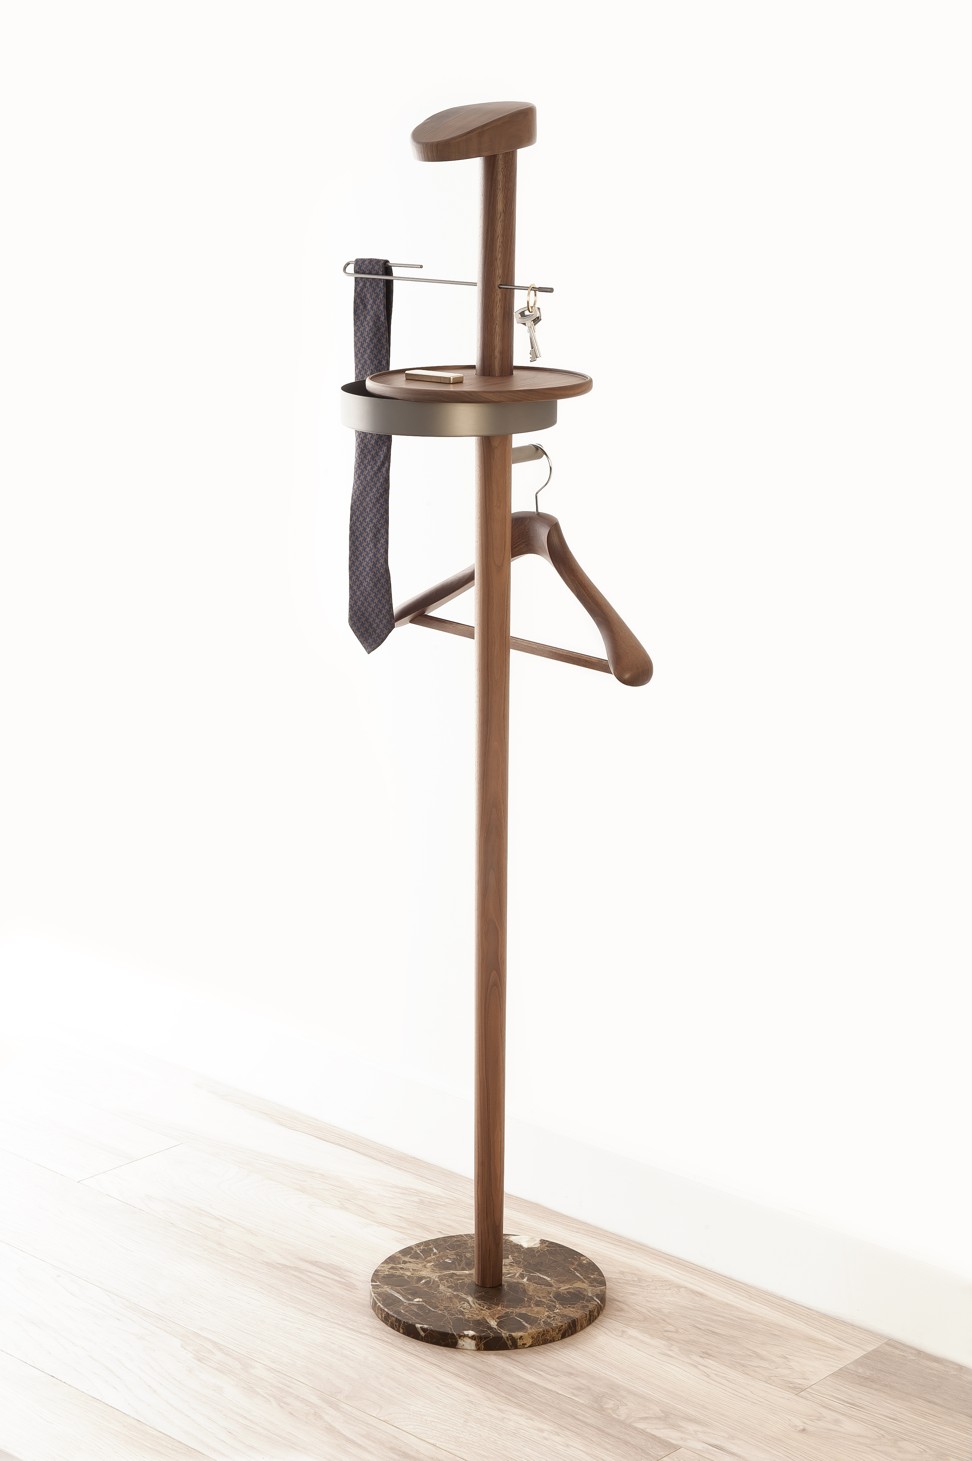 A reinterpretation of classic suit valet, the multifunctional clothes stand with a chic marble base is a must-have for the sophisticated gentleman. Price on Request